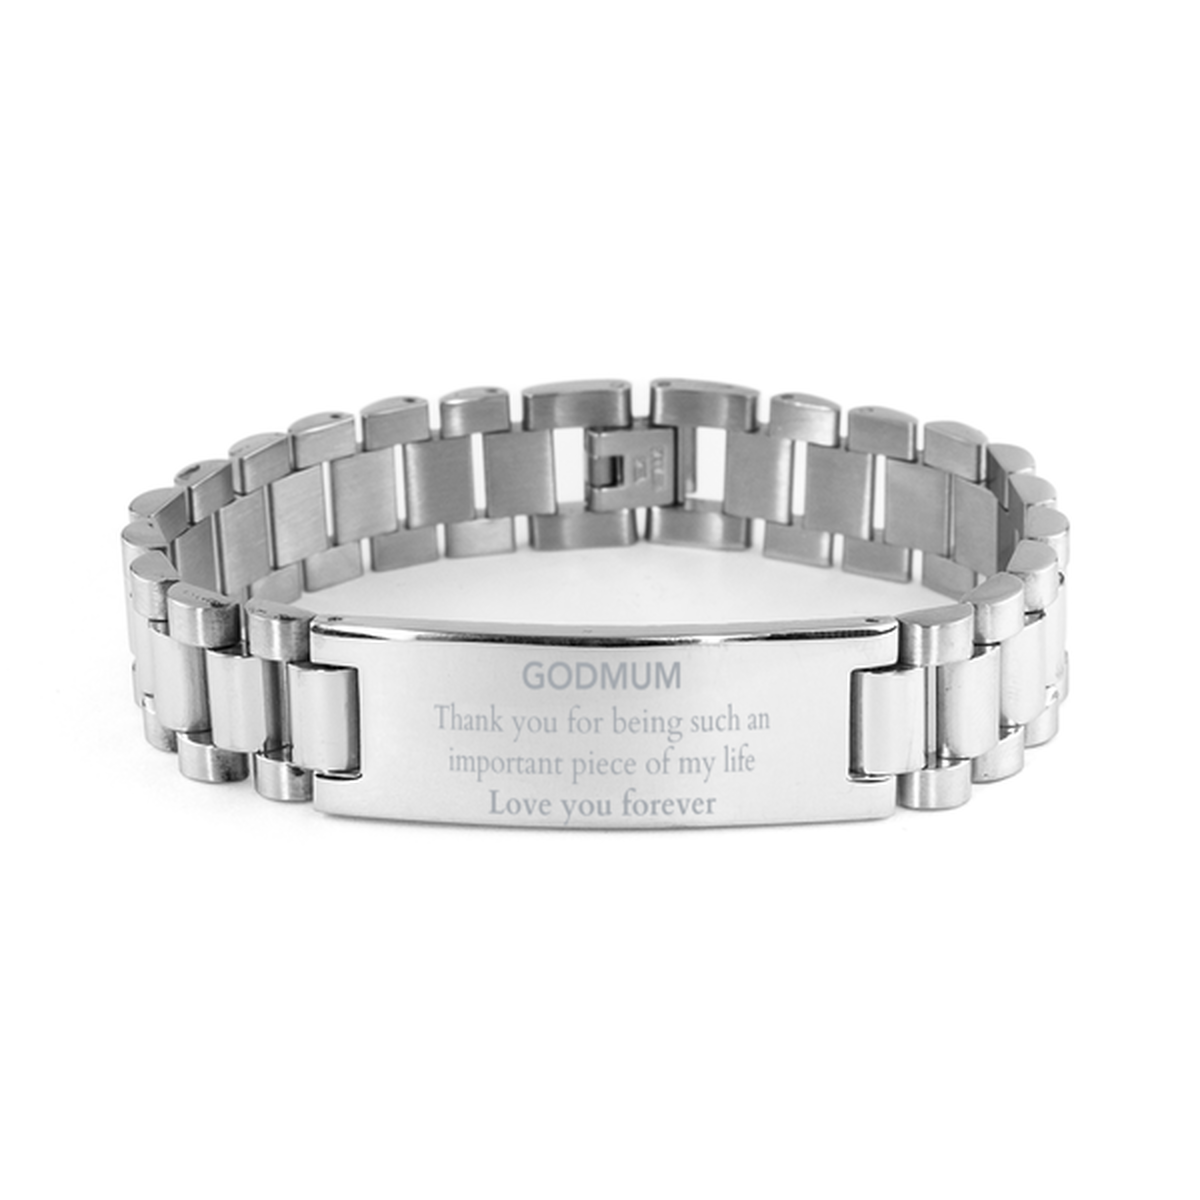 Appropriate Godmum Ladder Stainless Steel Bracelet Epic Birthday Gifts for Godmum Thank you for being such an important piece of my life Godmum Christmas Mothers Fathers Day